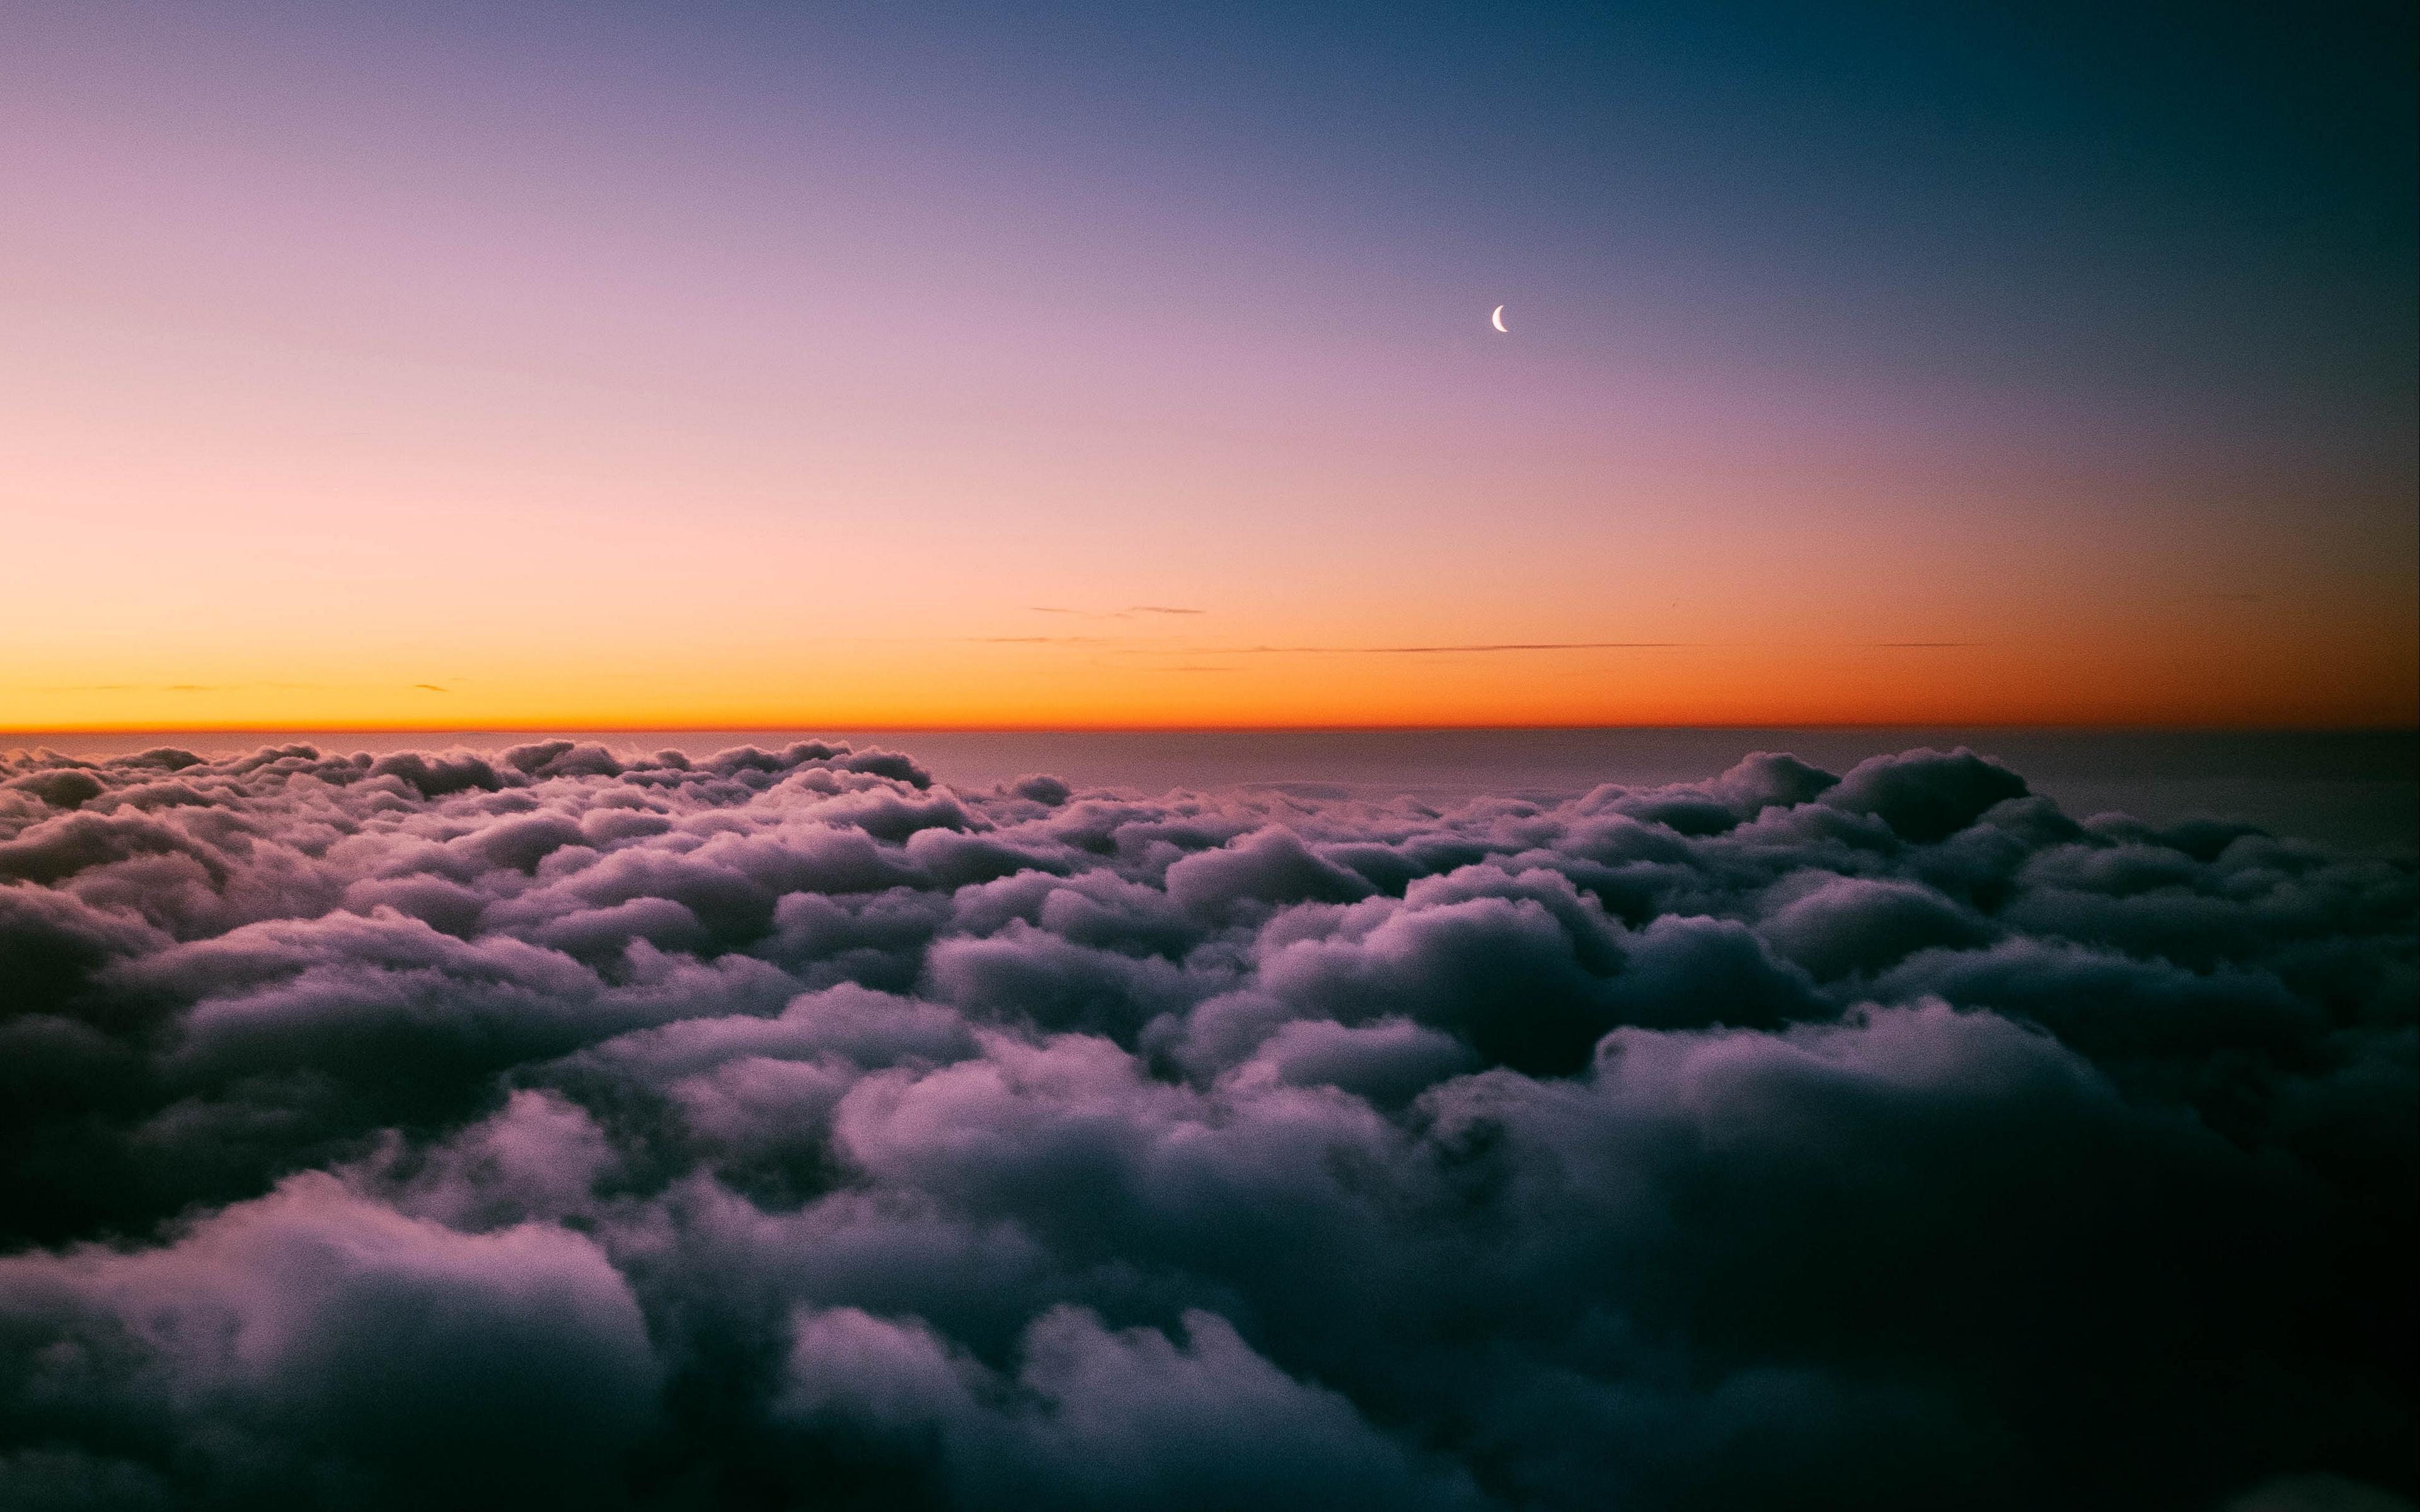 Download wallpaper 3840x2400 clouds, porous, sunset, sky